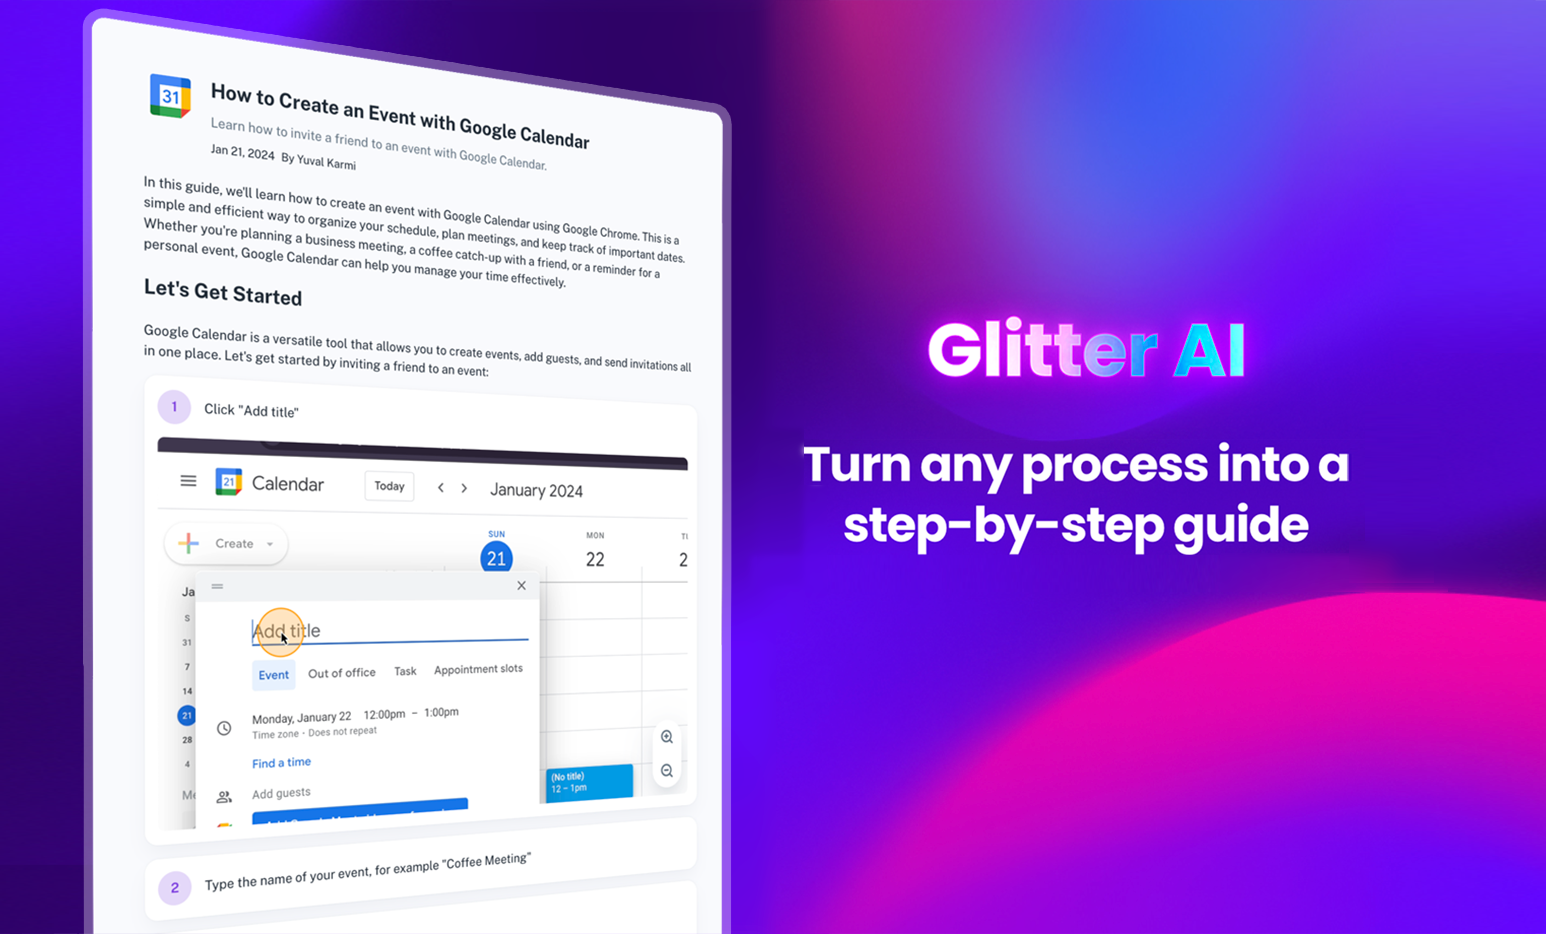 glitter-ai - Turn any process into a step-by-step guide